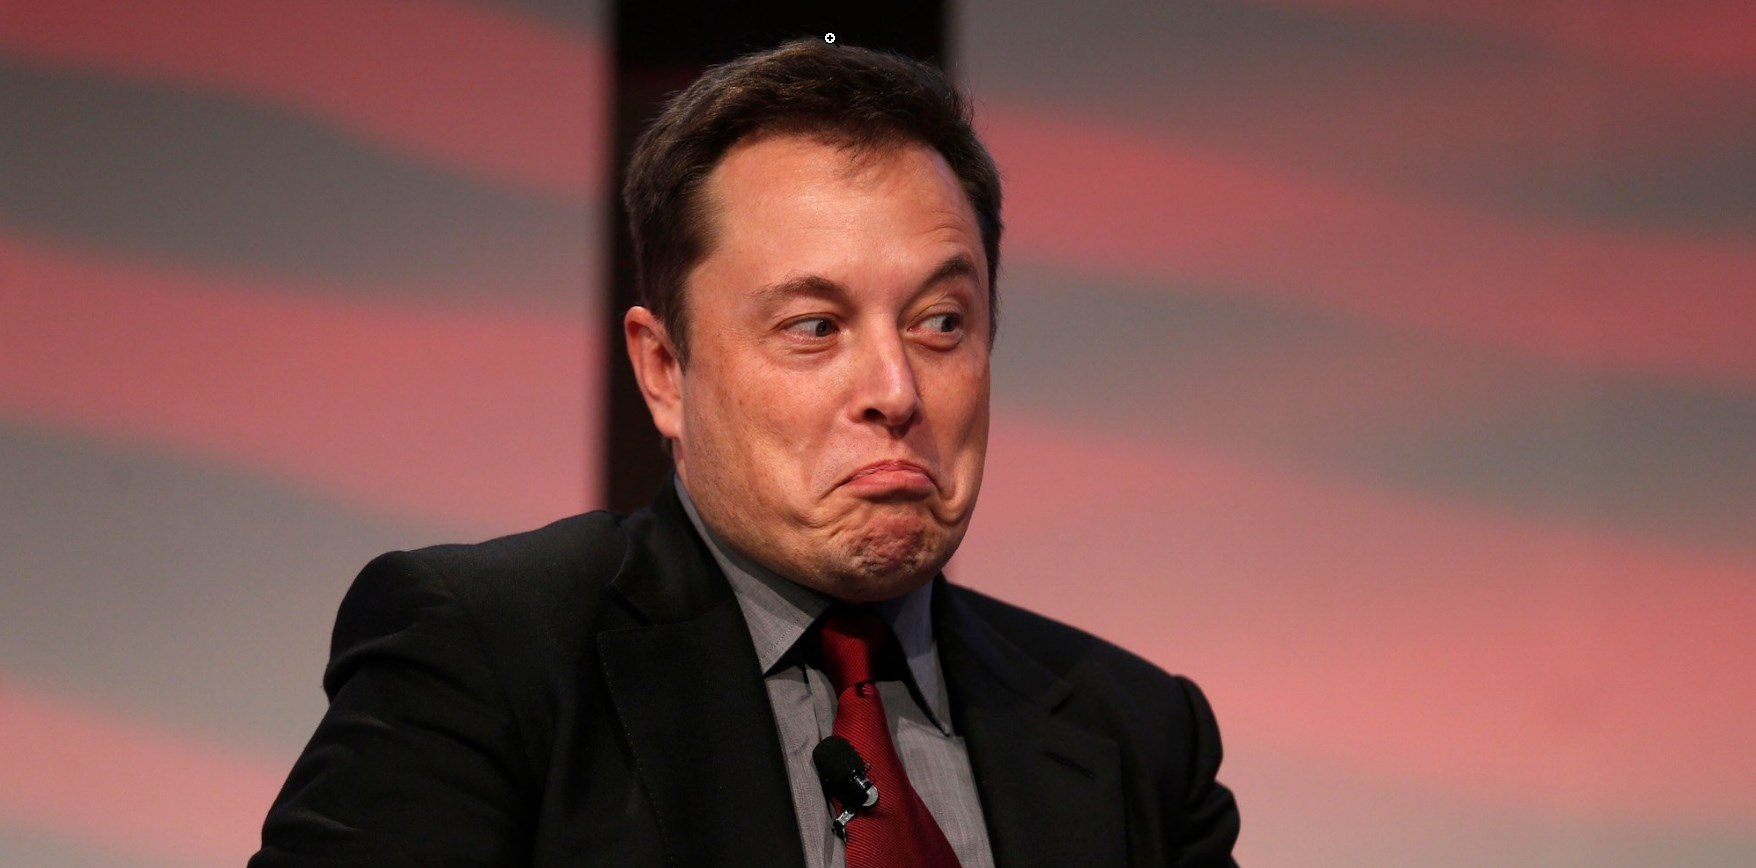 Ilon Musk has been named Time magazine's Man of the Year